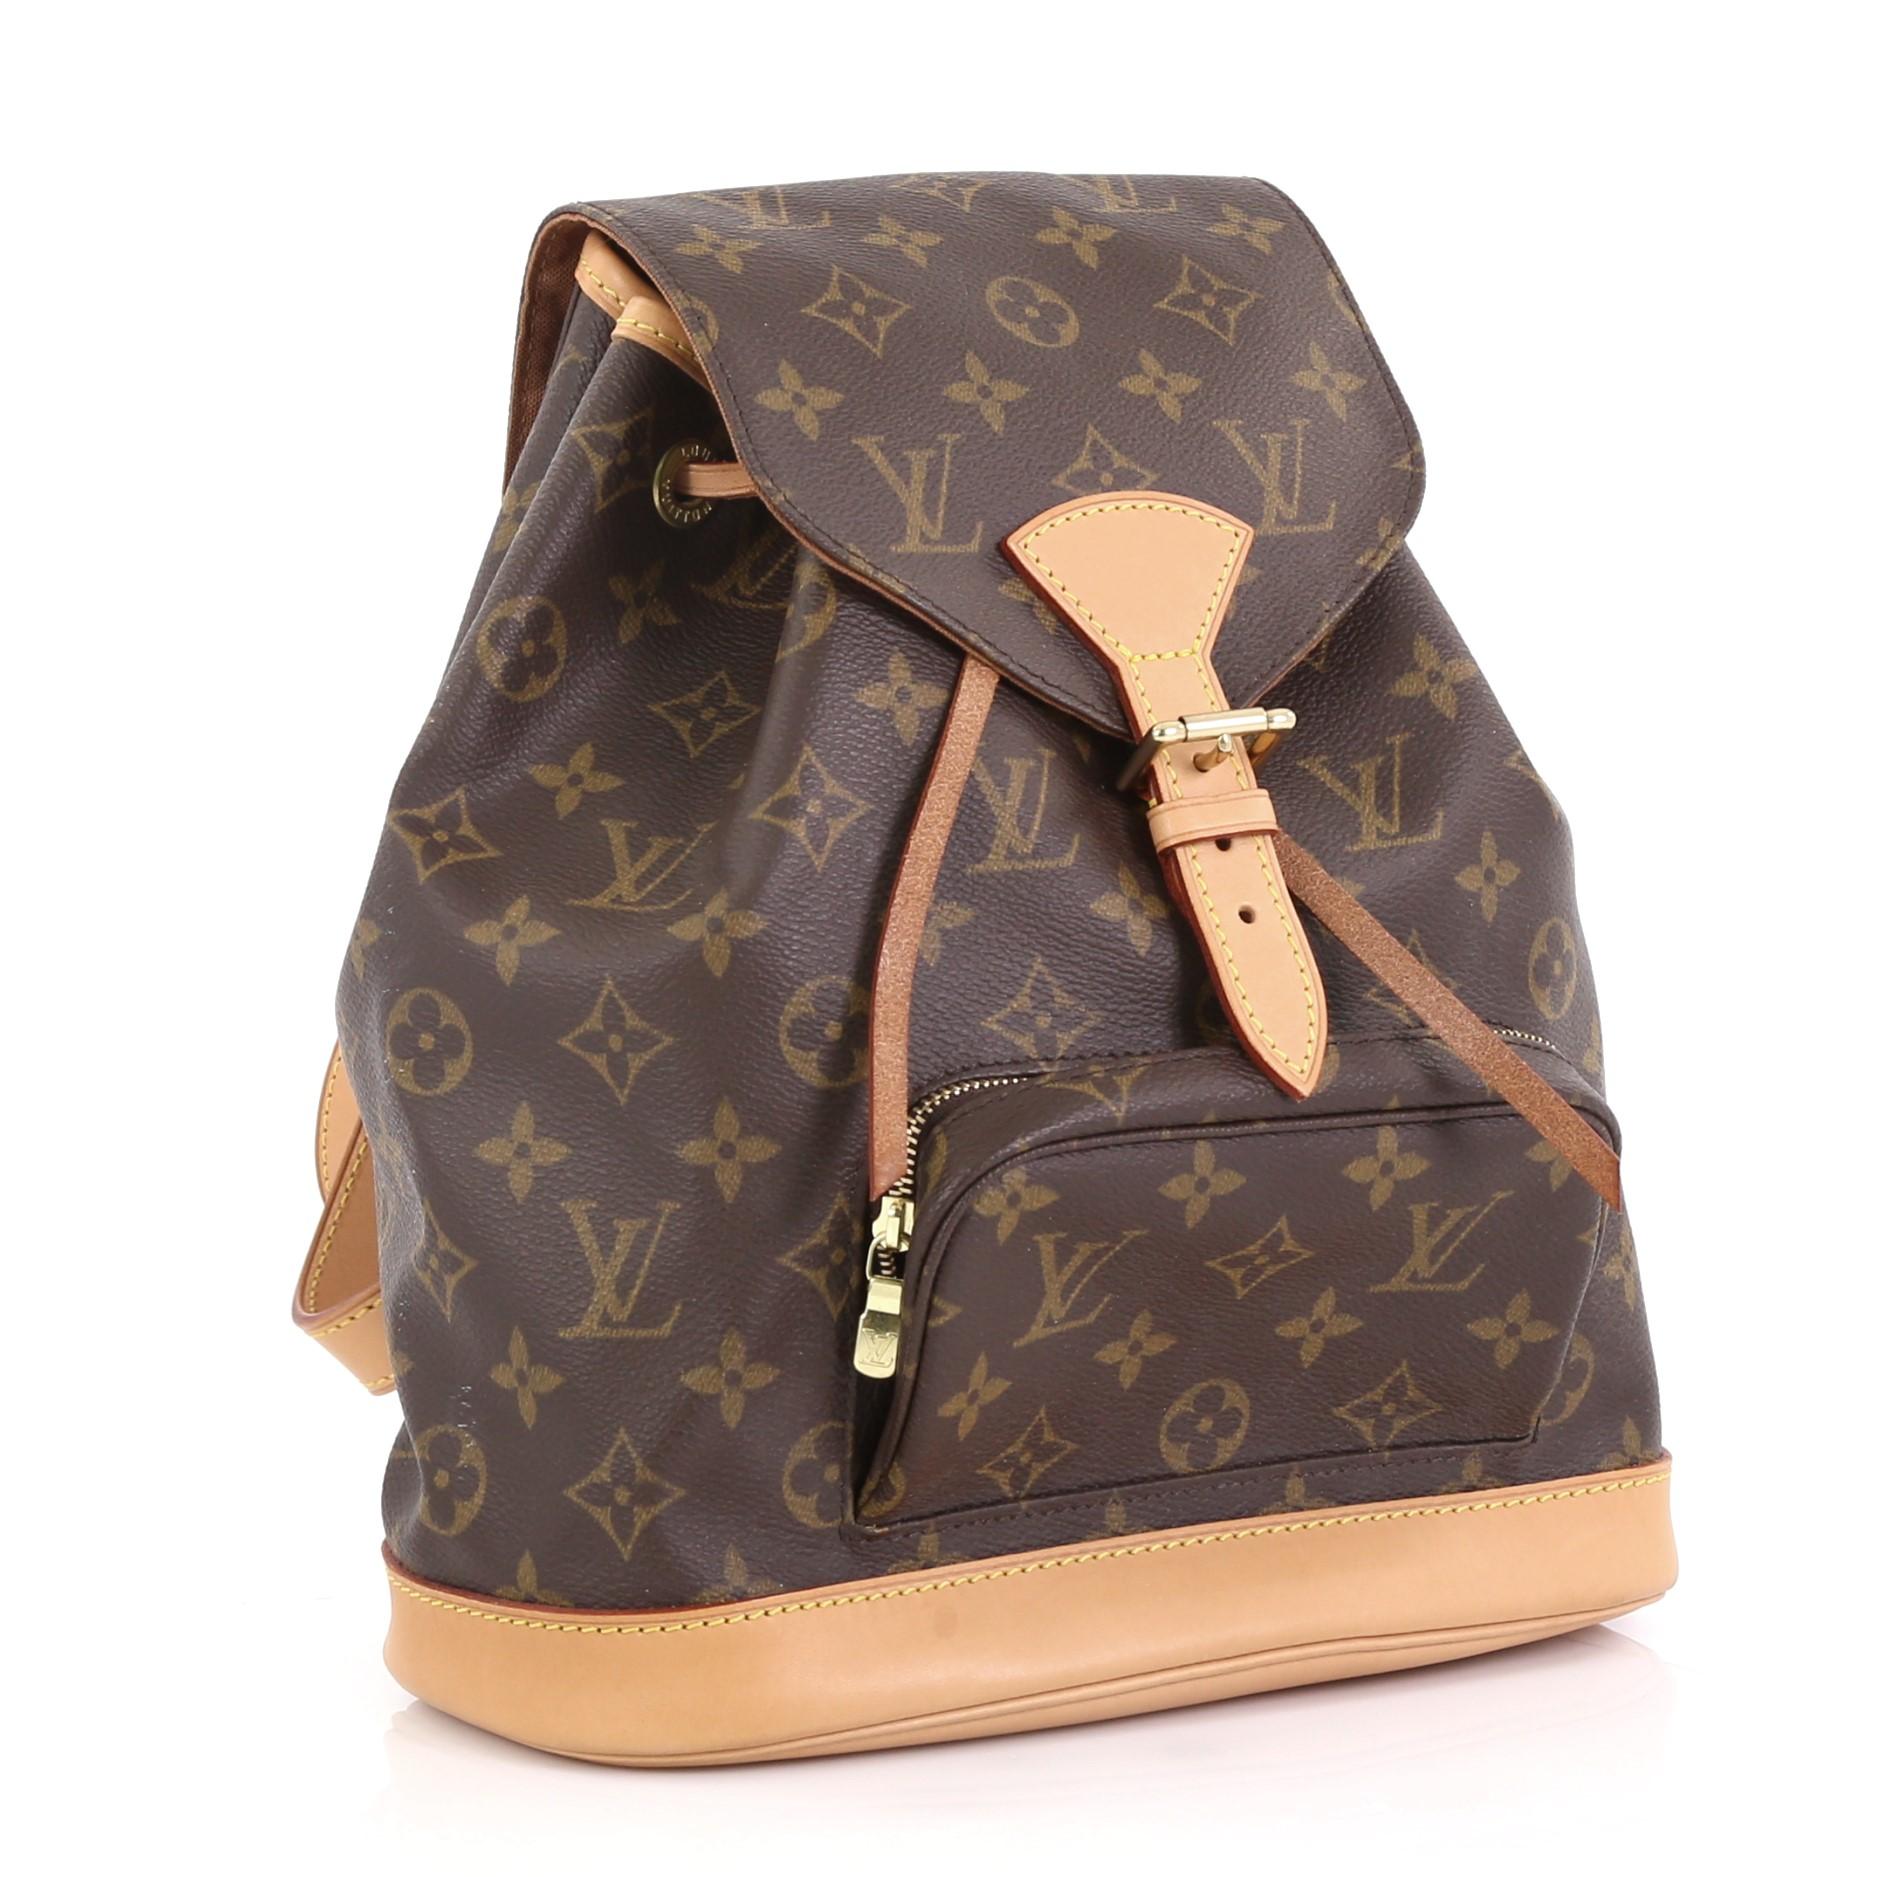 This Louis Vuitton Montsouris Backpack Monogram Canvas MM, crafted from brown monogram coated canvas, features adjustable shoulder straps, exterior front zip pocket, and gold-tone hardware. Its buckle and drawstring closure opens to a brown fabric